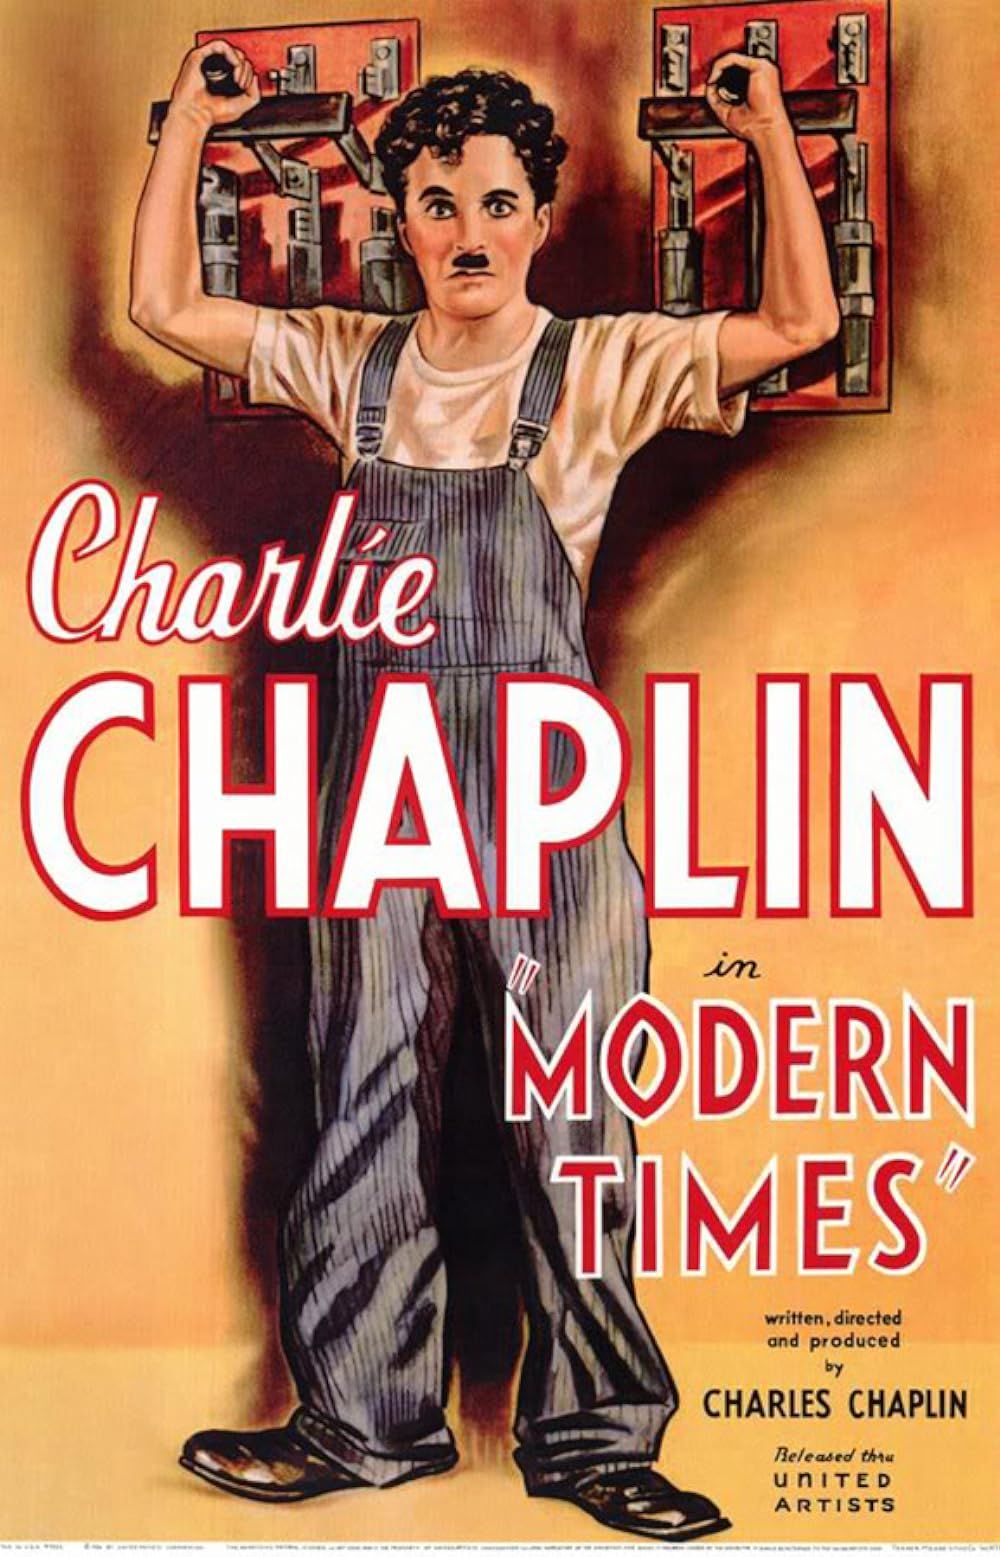 An Illustration of Charlie Chaplin on the Modern Times Poster